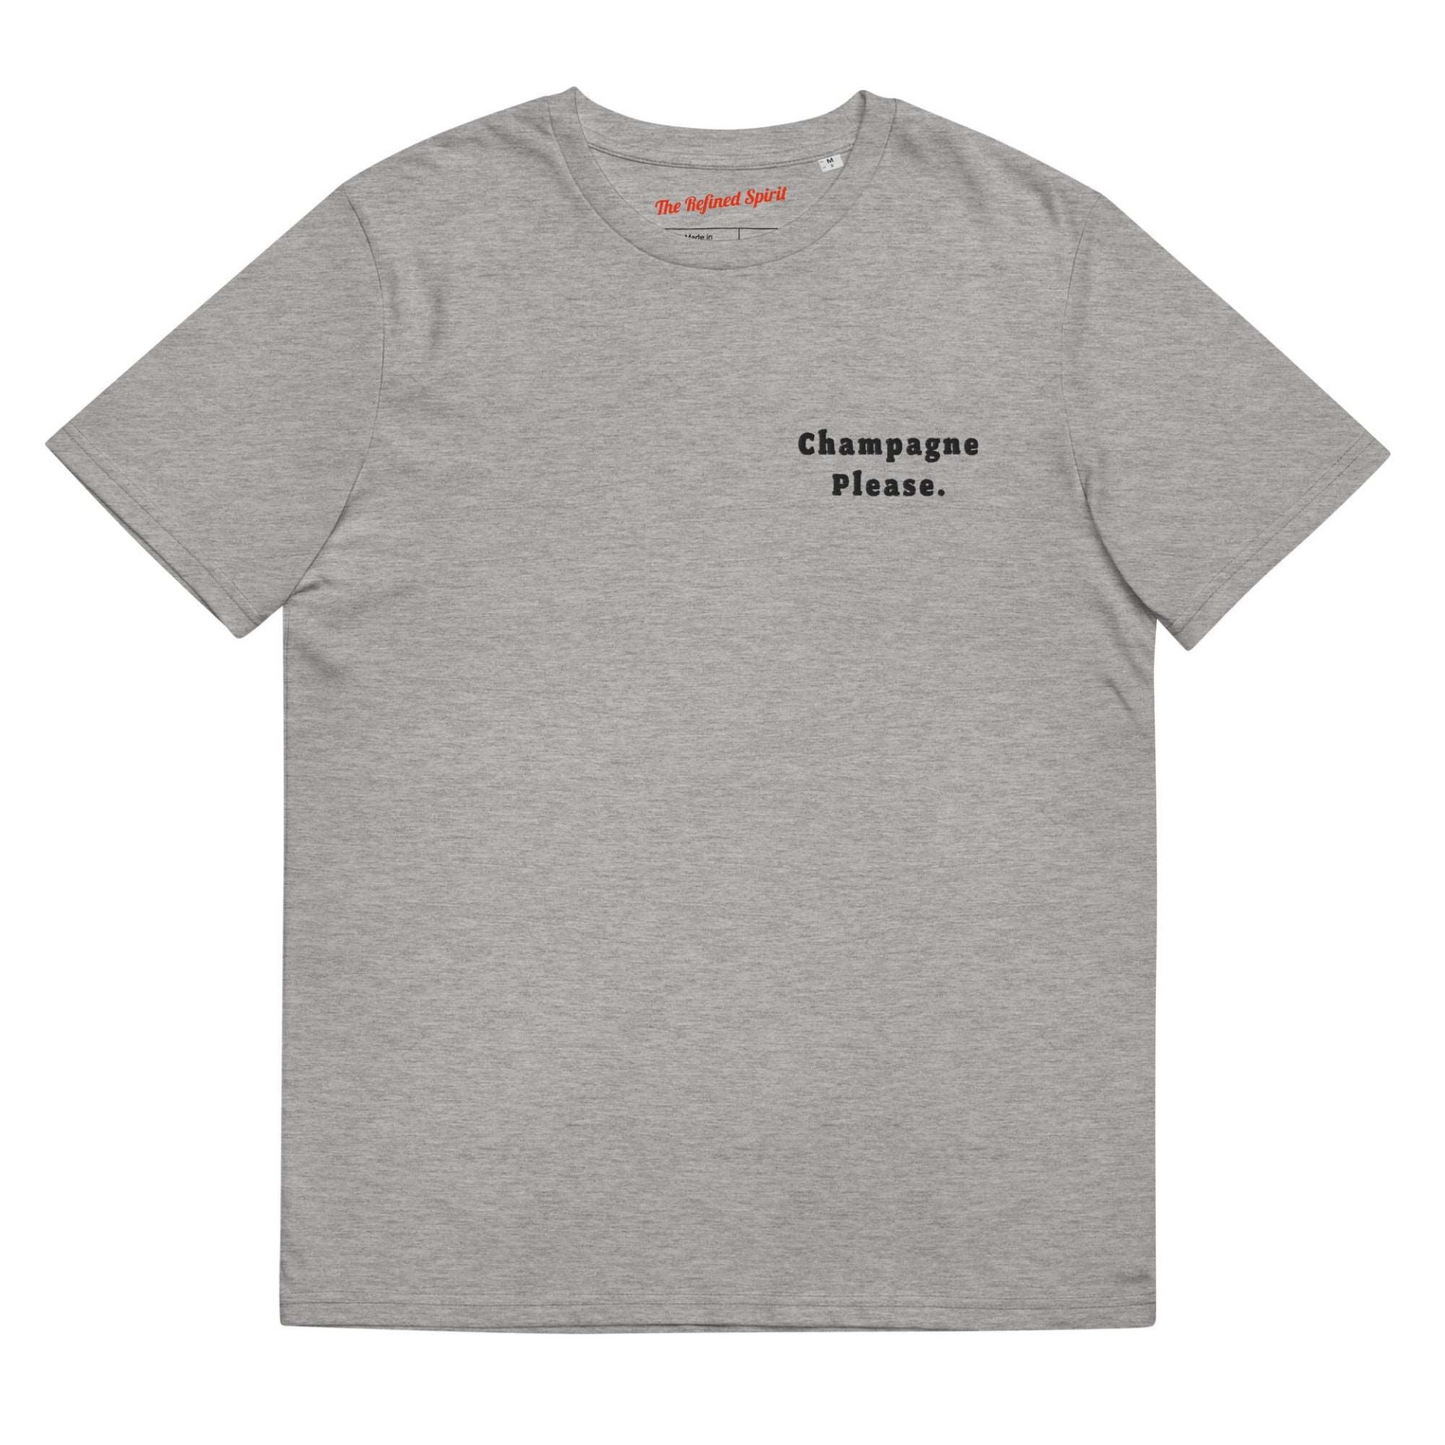 Champagne Please - Organic Embroidered T-shirt